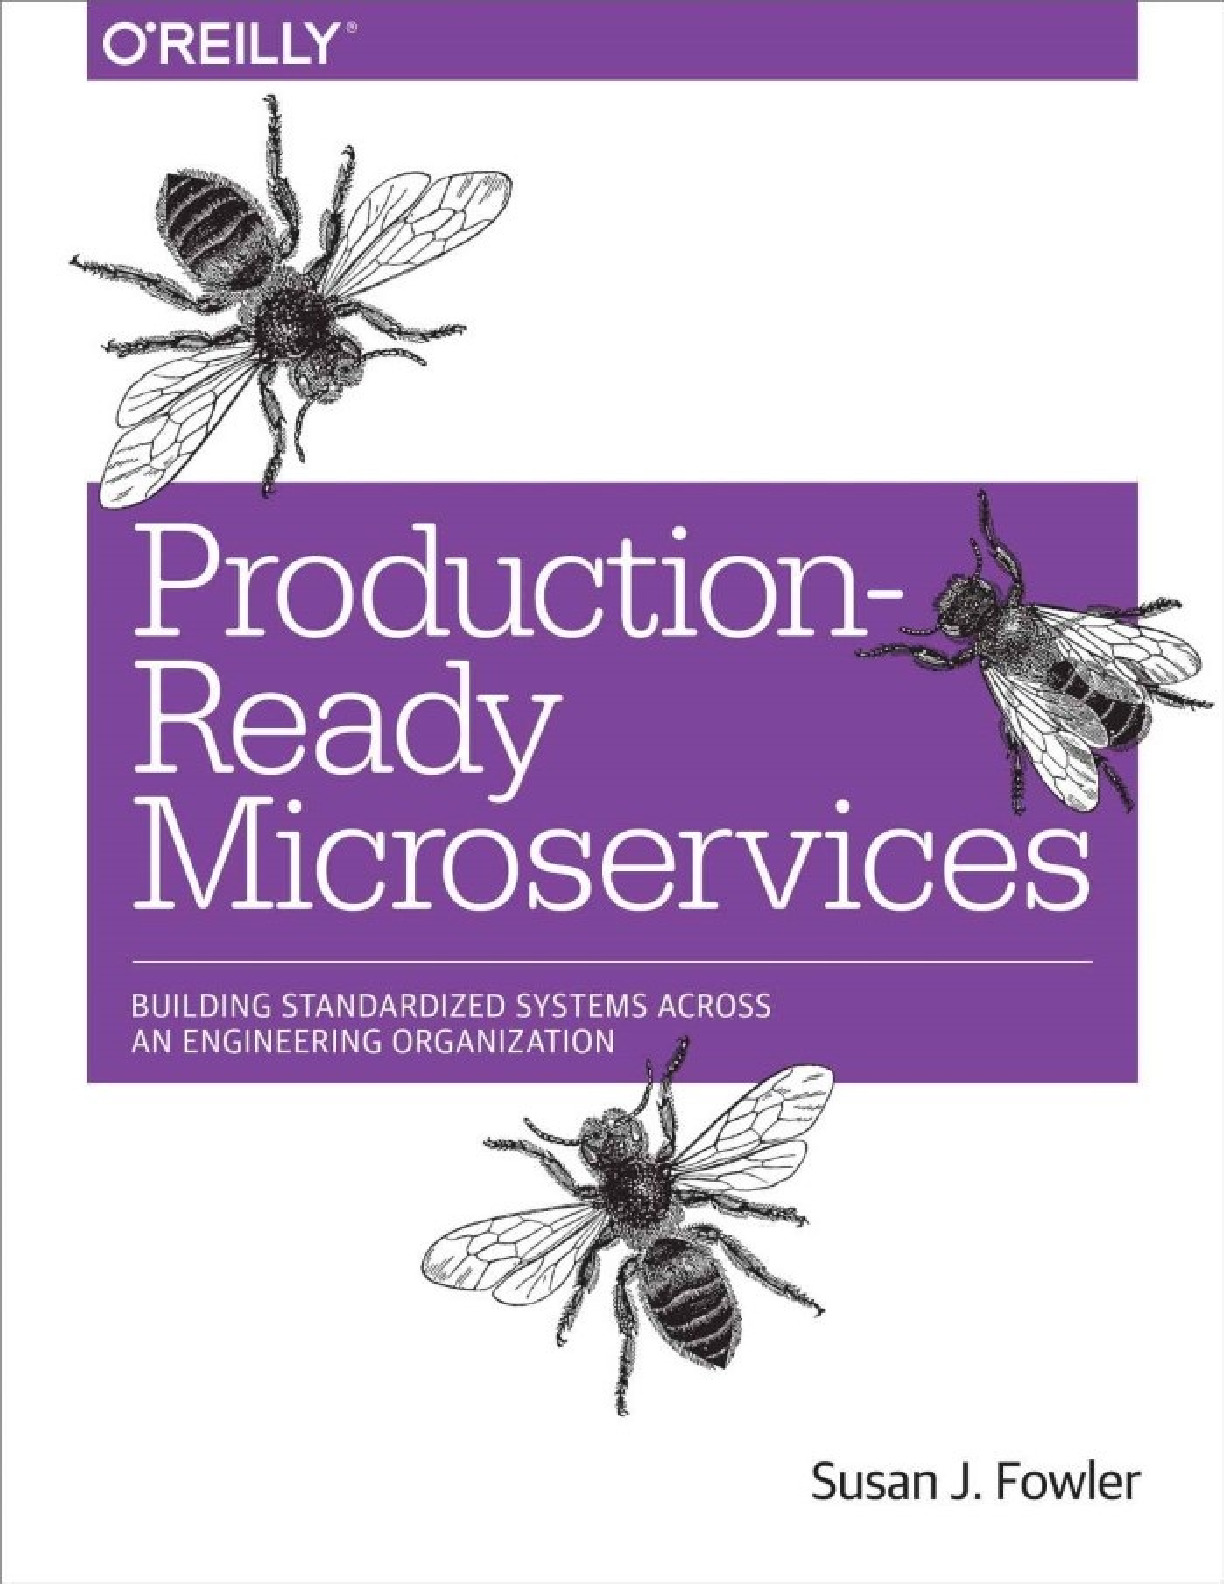 Production Ready Microservices